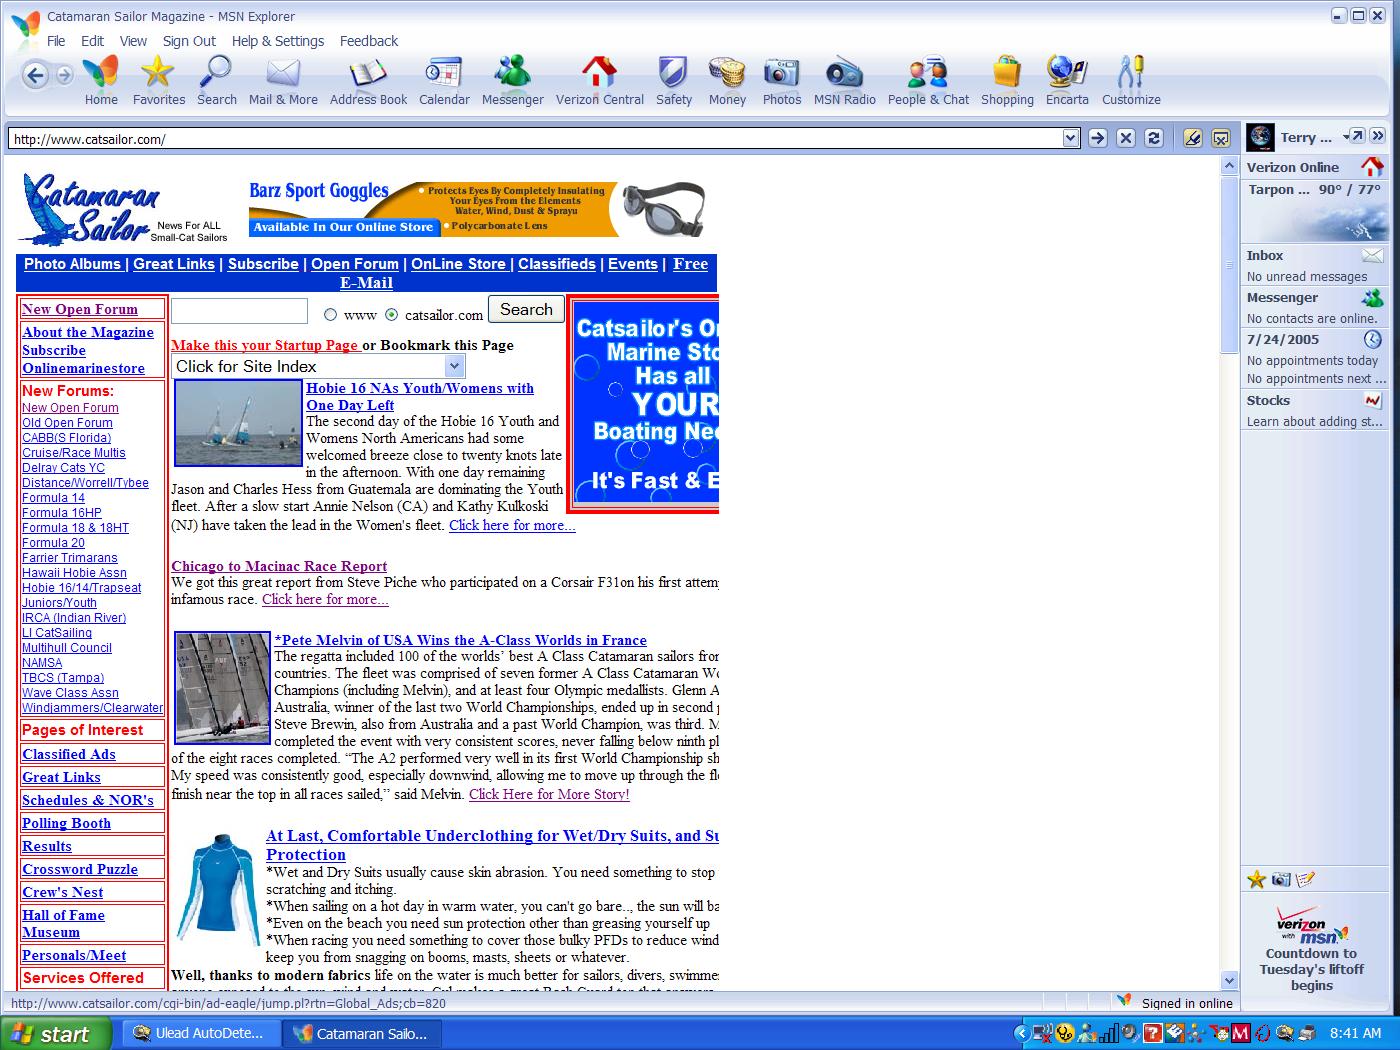 Attached picture 54216-Catamaran Sailor Main Page Paint 7-24-05.JPG